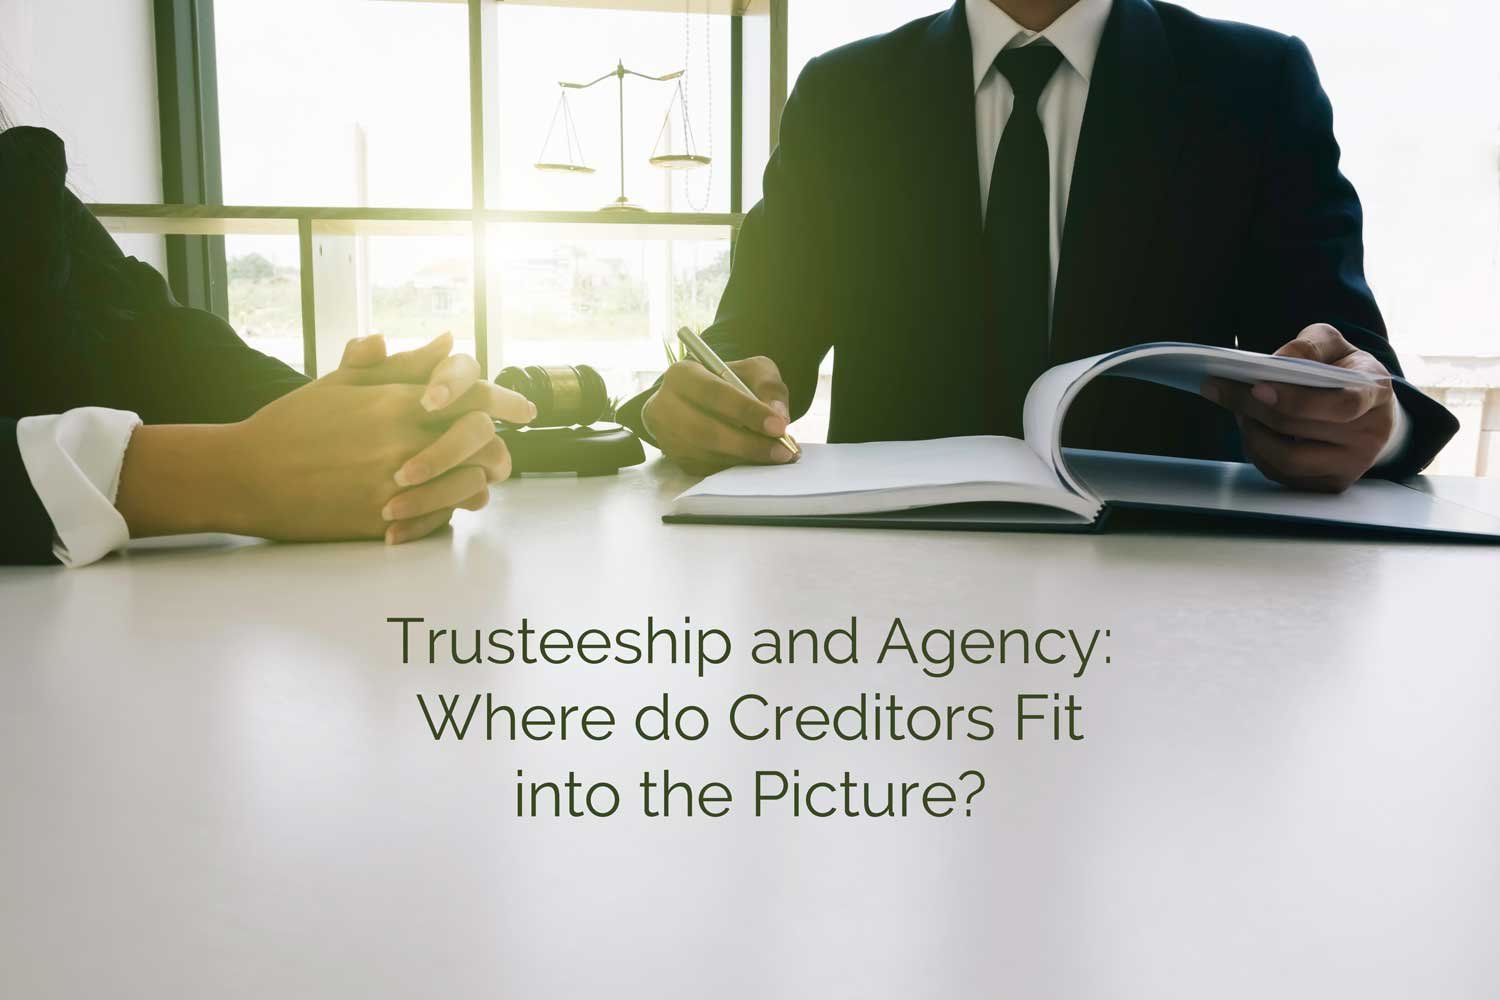 Trusteeship-and-Agency-Where-do-Creditors-Fit-into-the-Picture